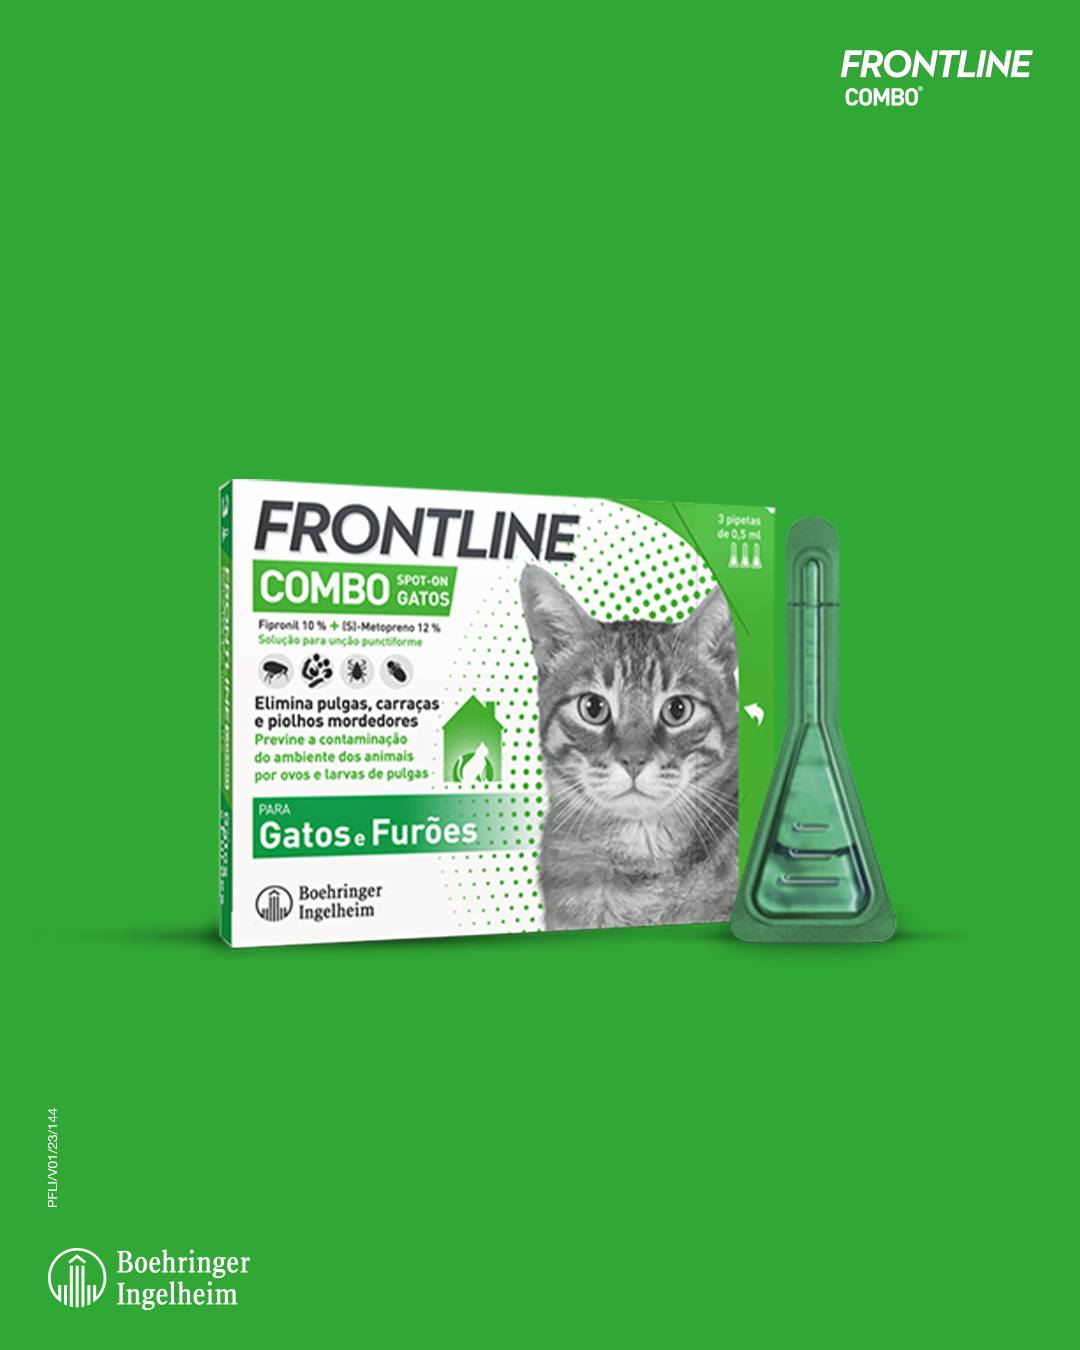 “FRONTLINE COMBO® Gatos” with music administered by Syncsongs